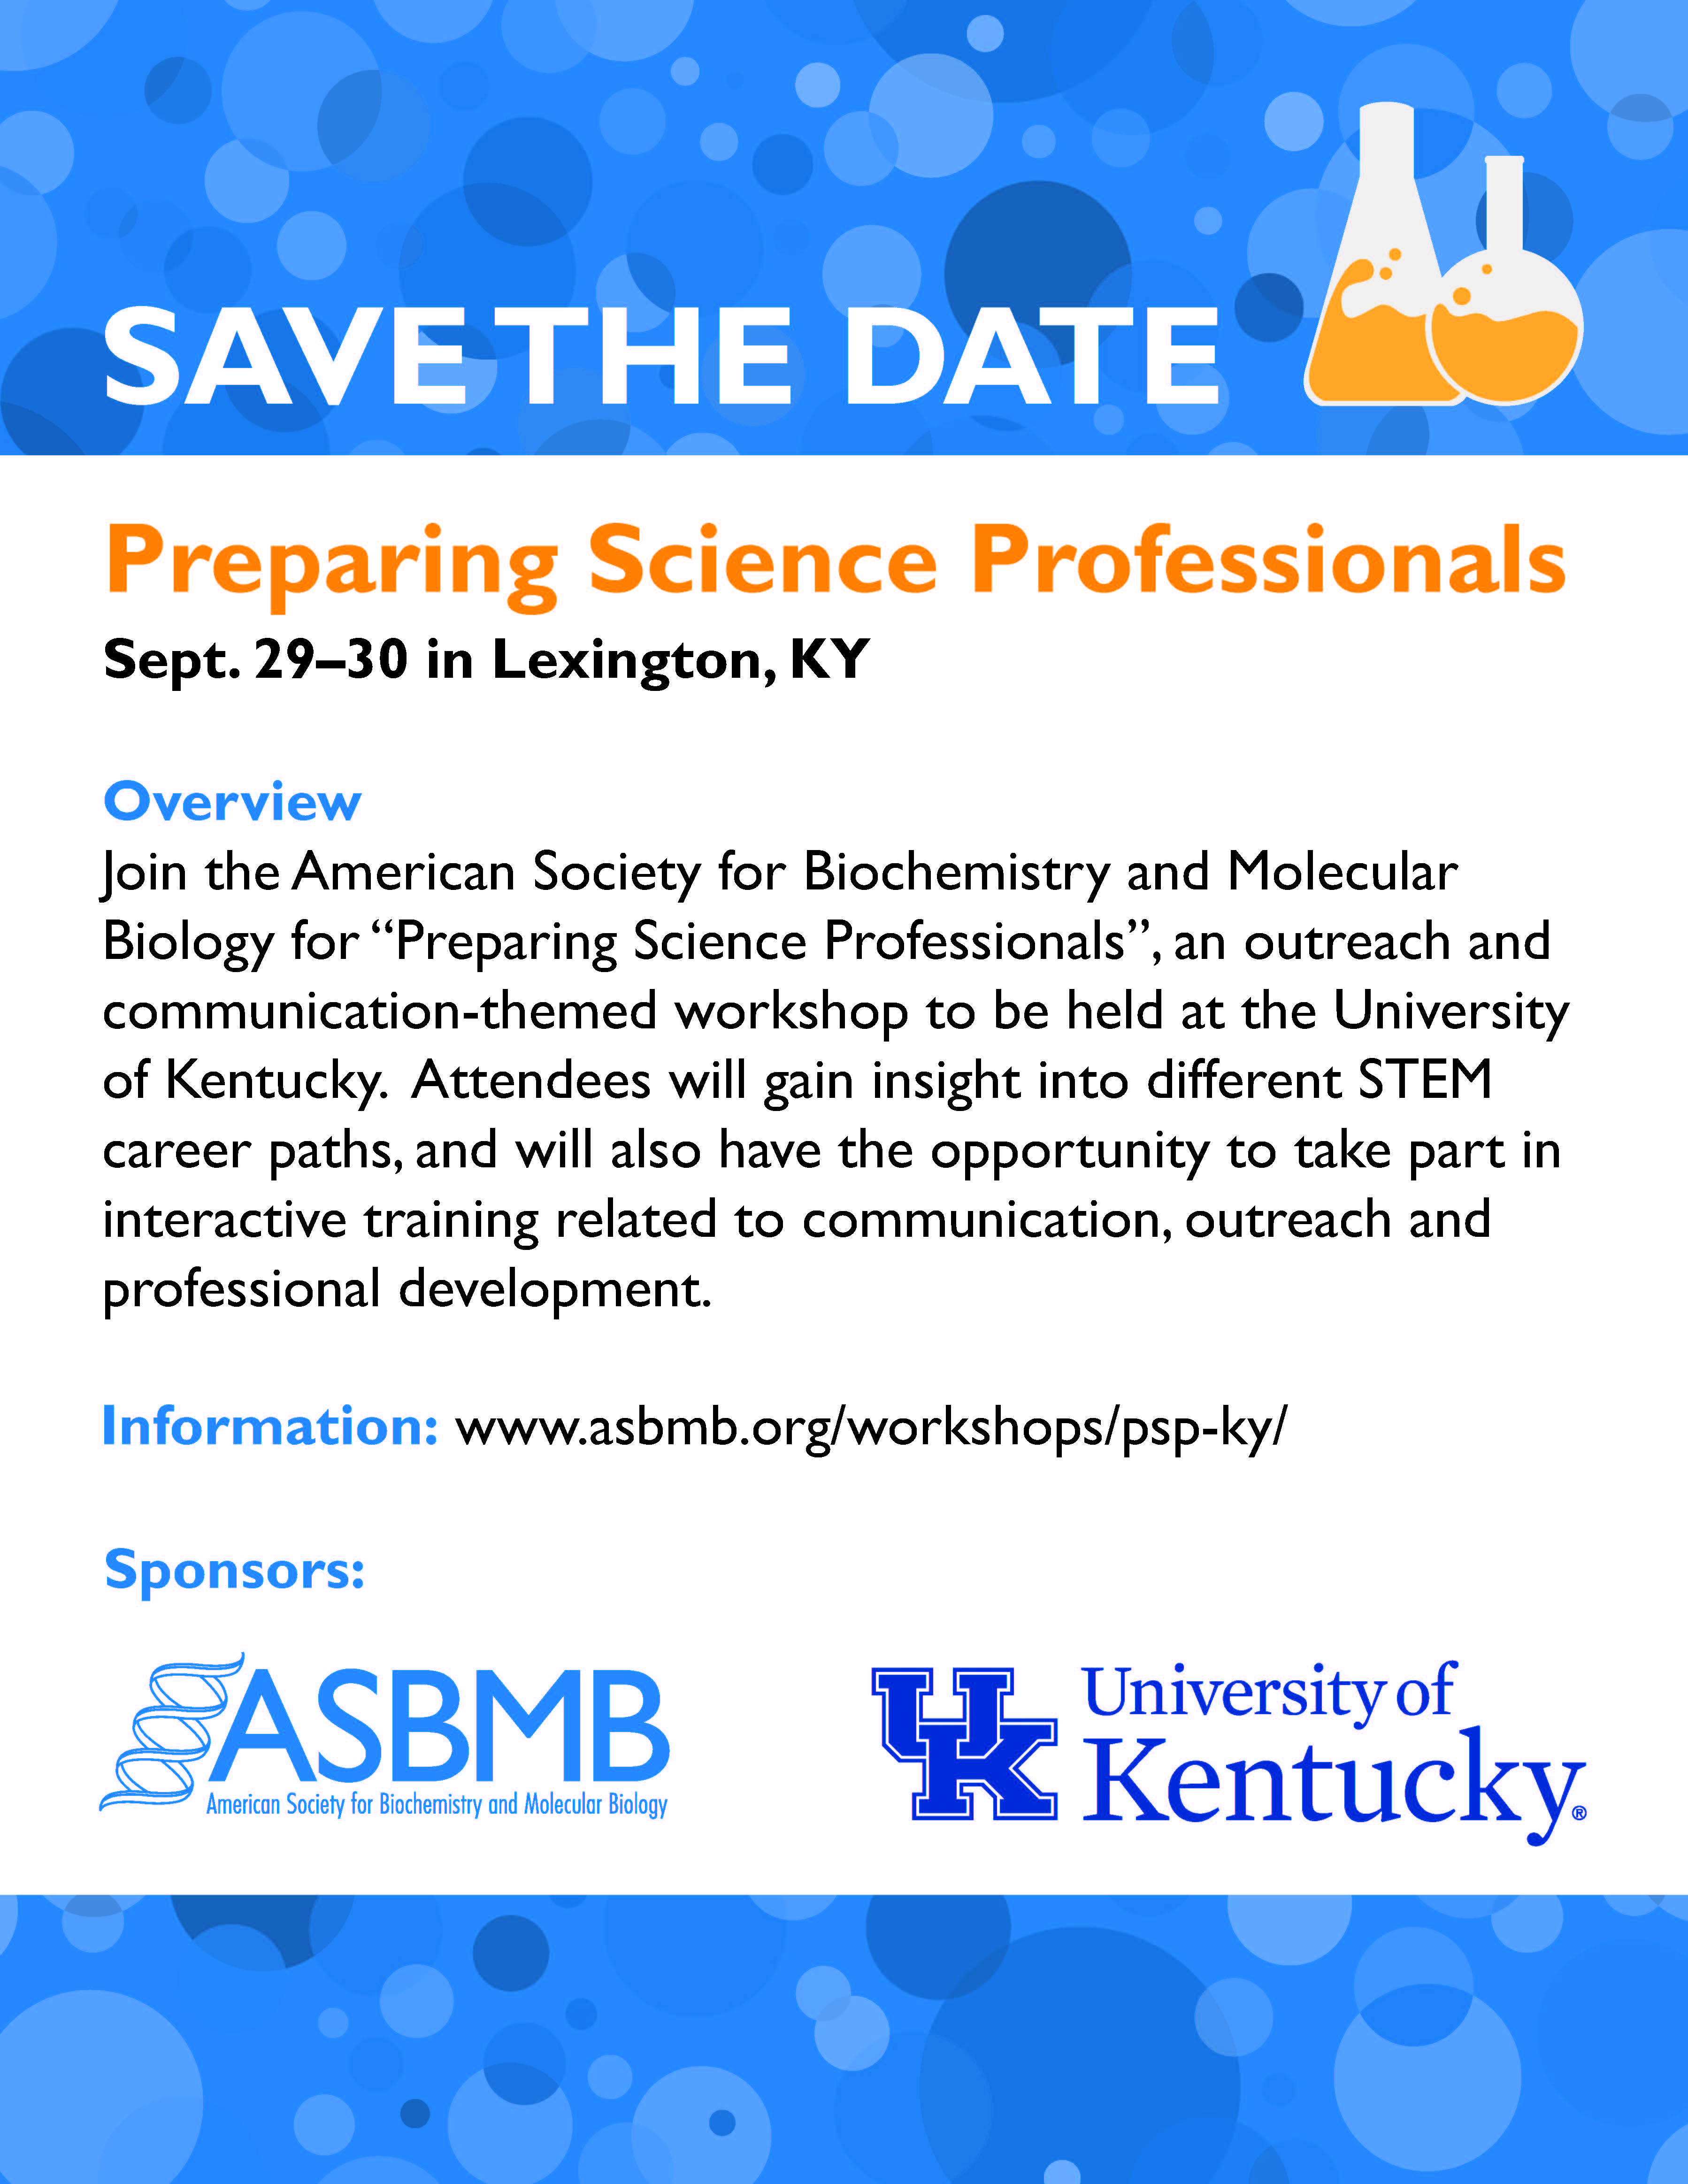 Preparing Science Professionals Save the Date (1).jpg